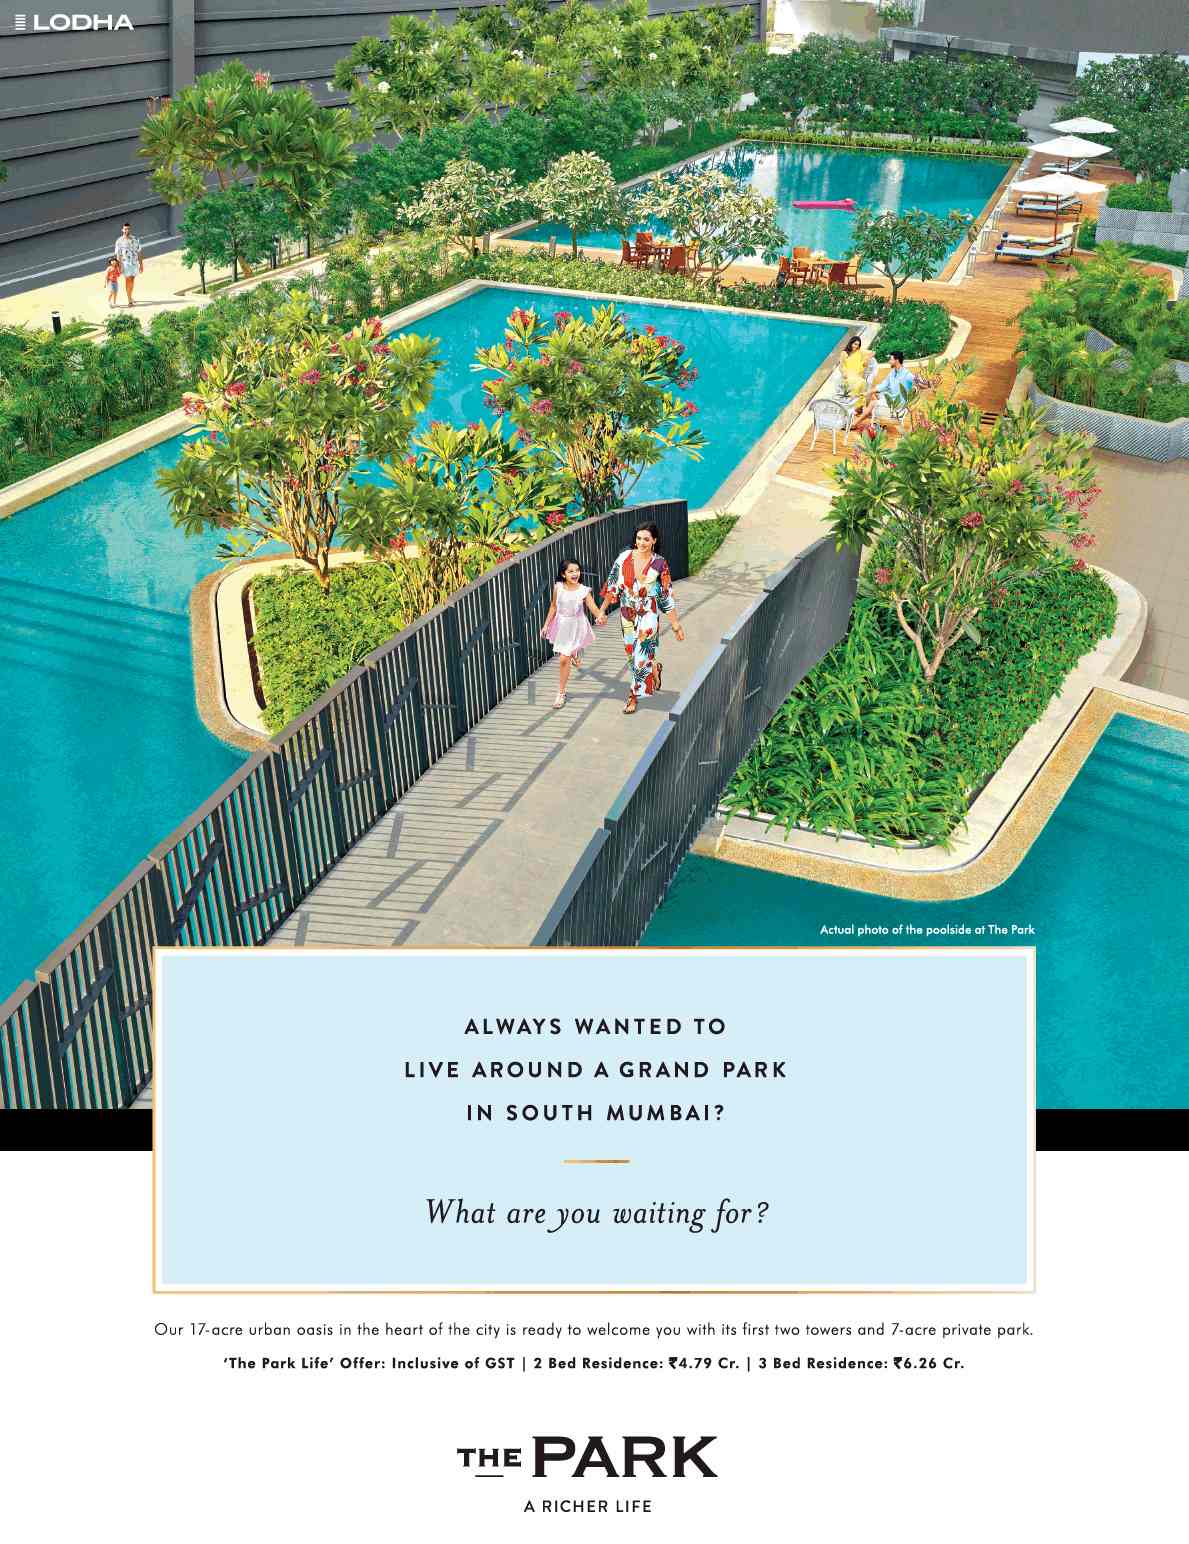 Enjoy in the 17-acre urban oasis at Lodha The Park in Worli, Mumbai Update